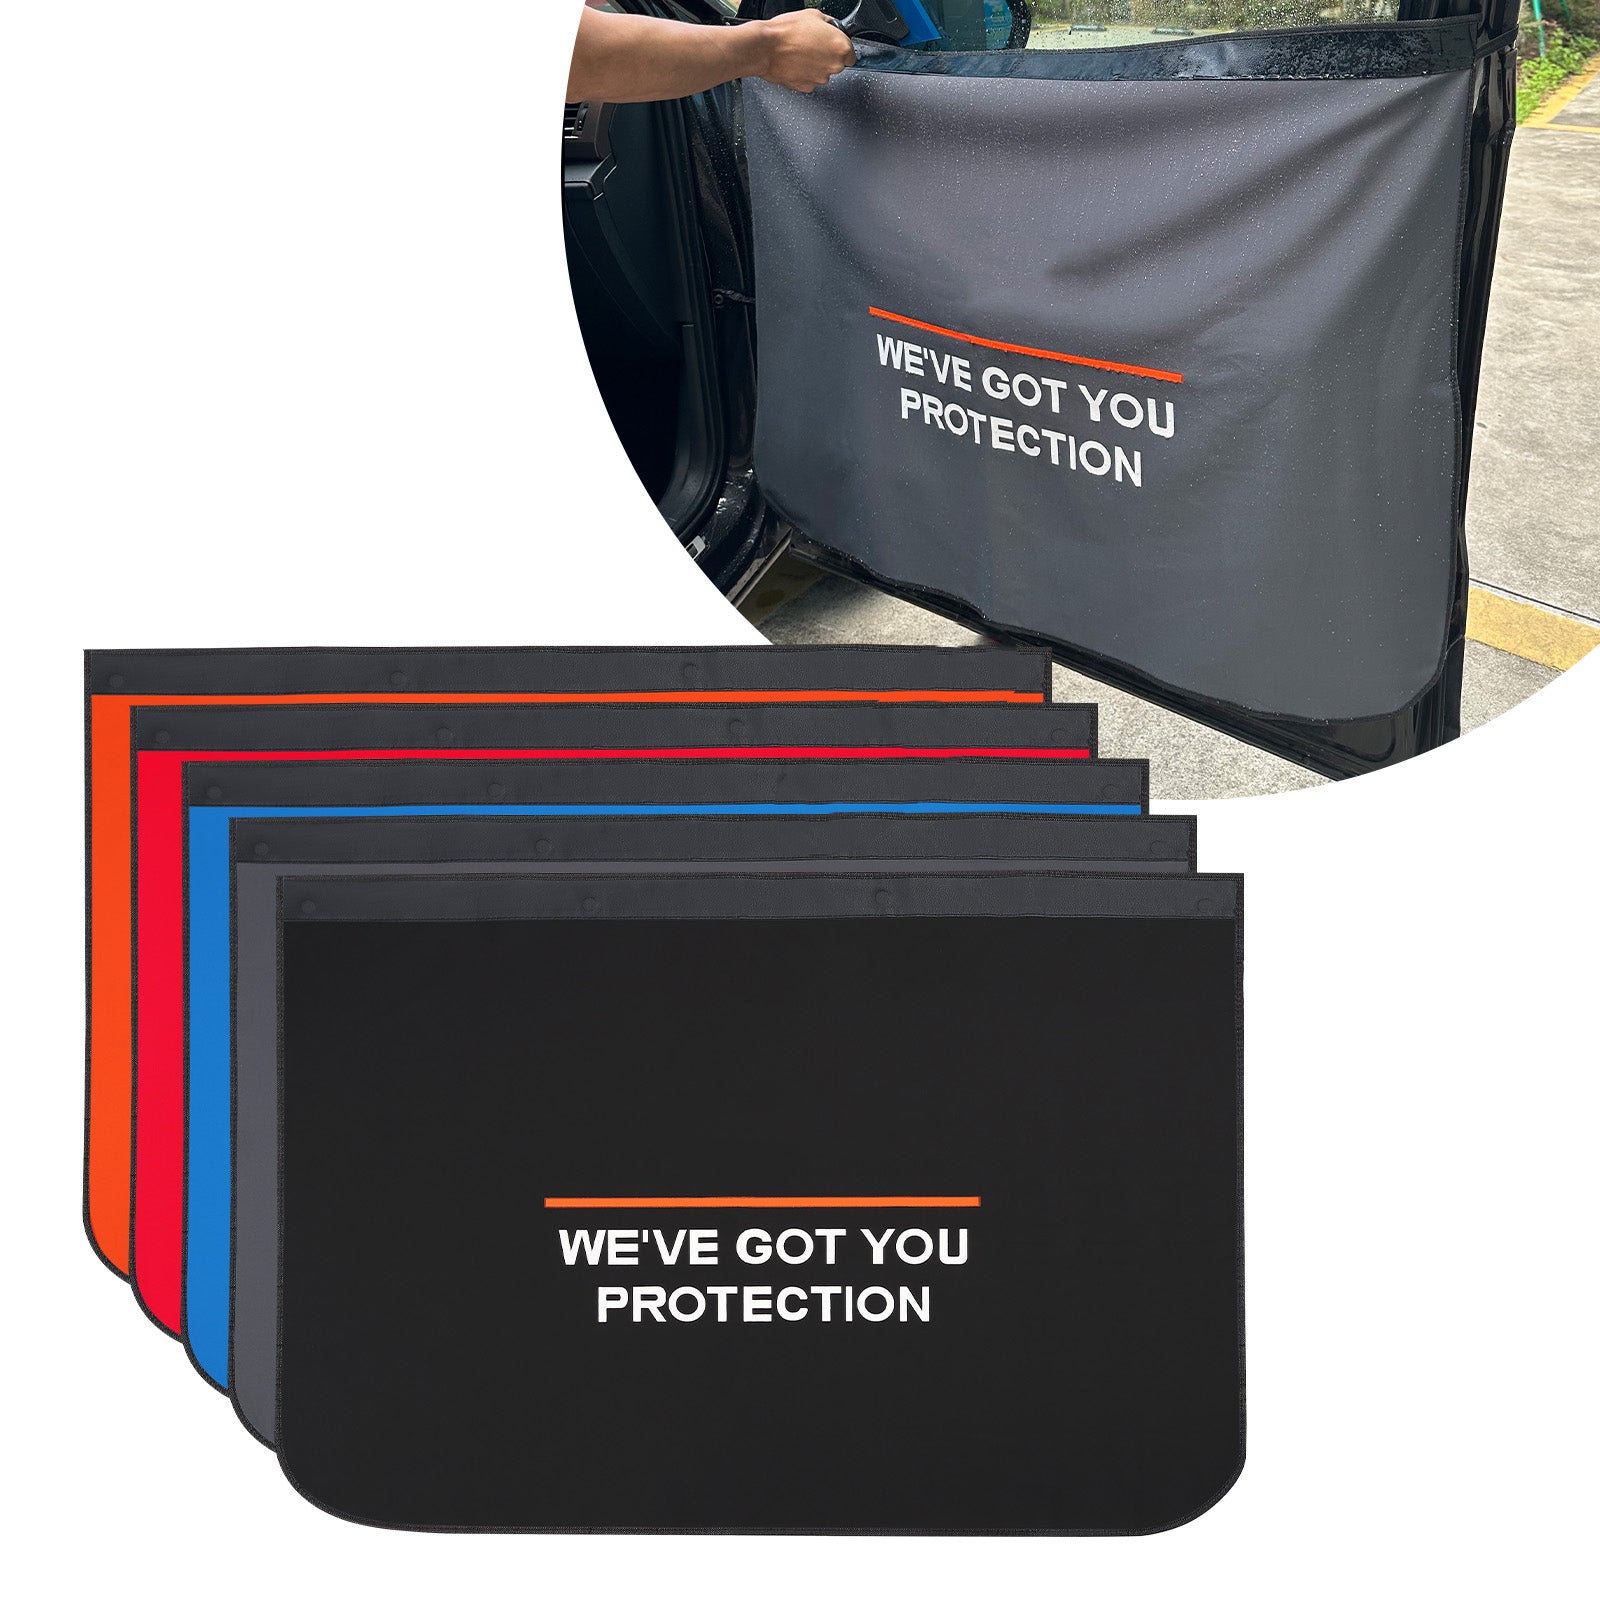 Entire Car Door & Hood Protection Cover Set in use, providing comprehensive protection to vehicle during window tint installation